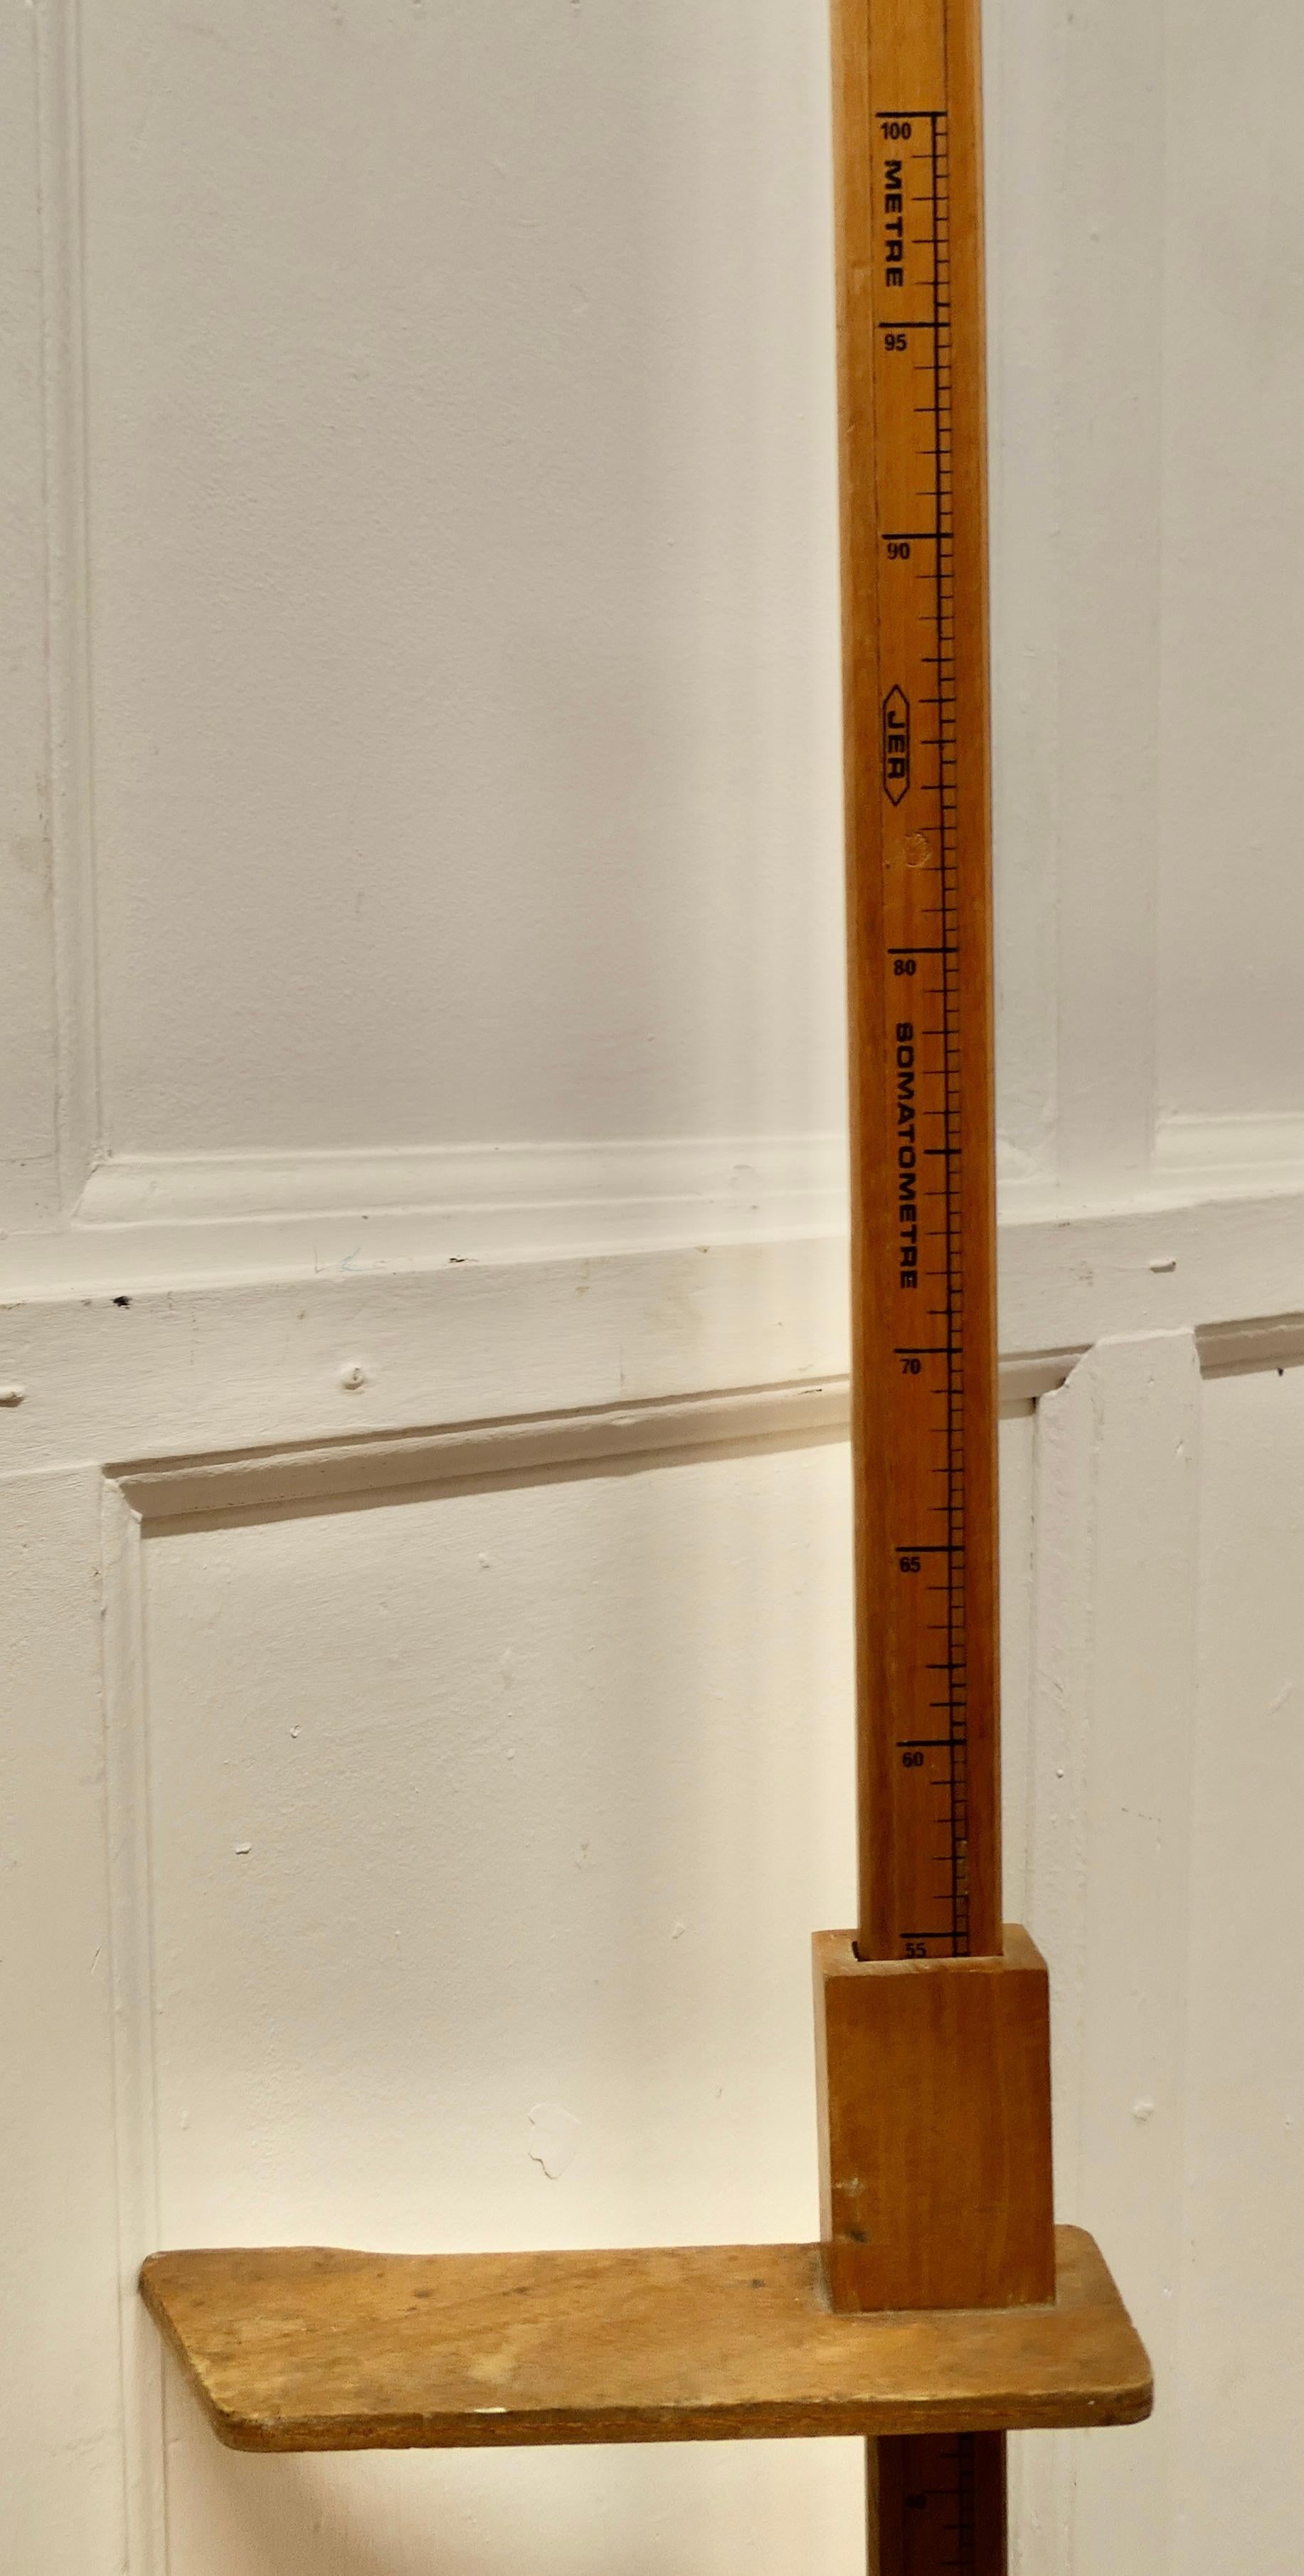 Pharmacy Child Measure Stand, Pitch Pine Measuring Stick or Somastometre    In Good Condition For Sale In Chillerton, Isle of Wight